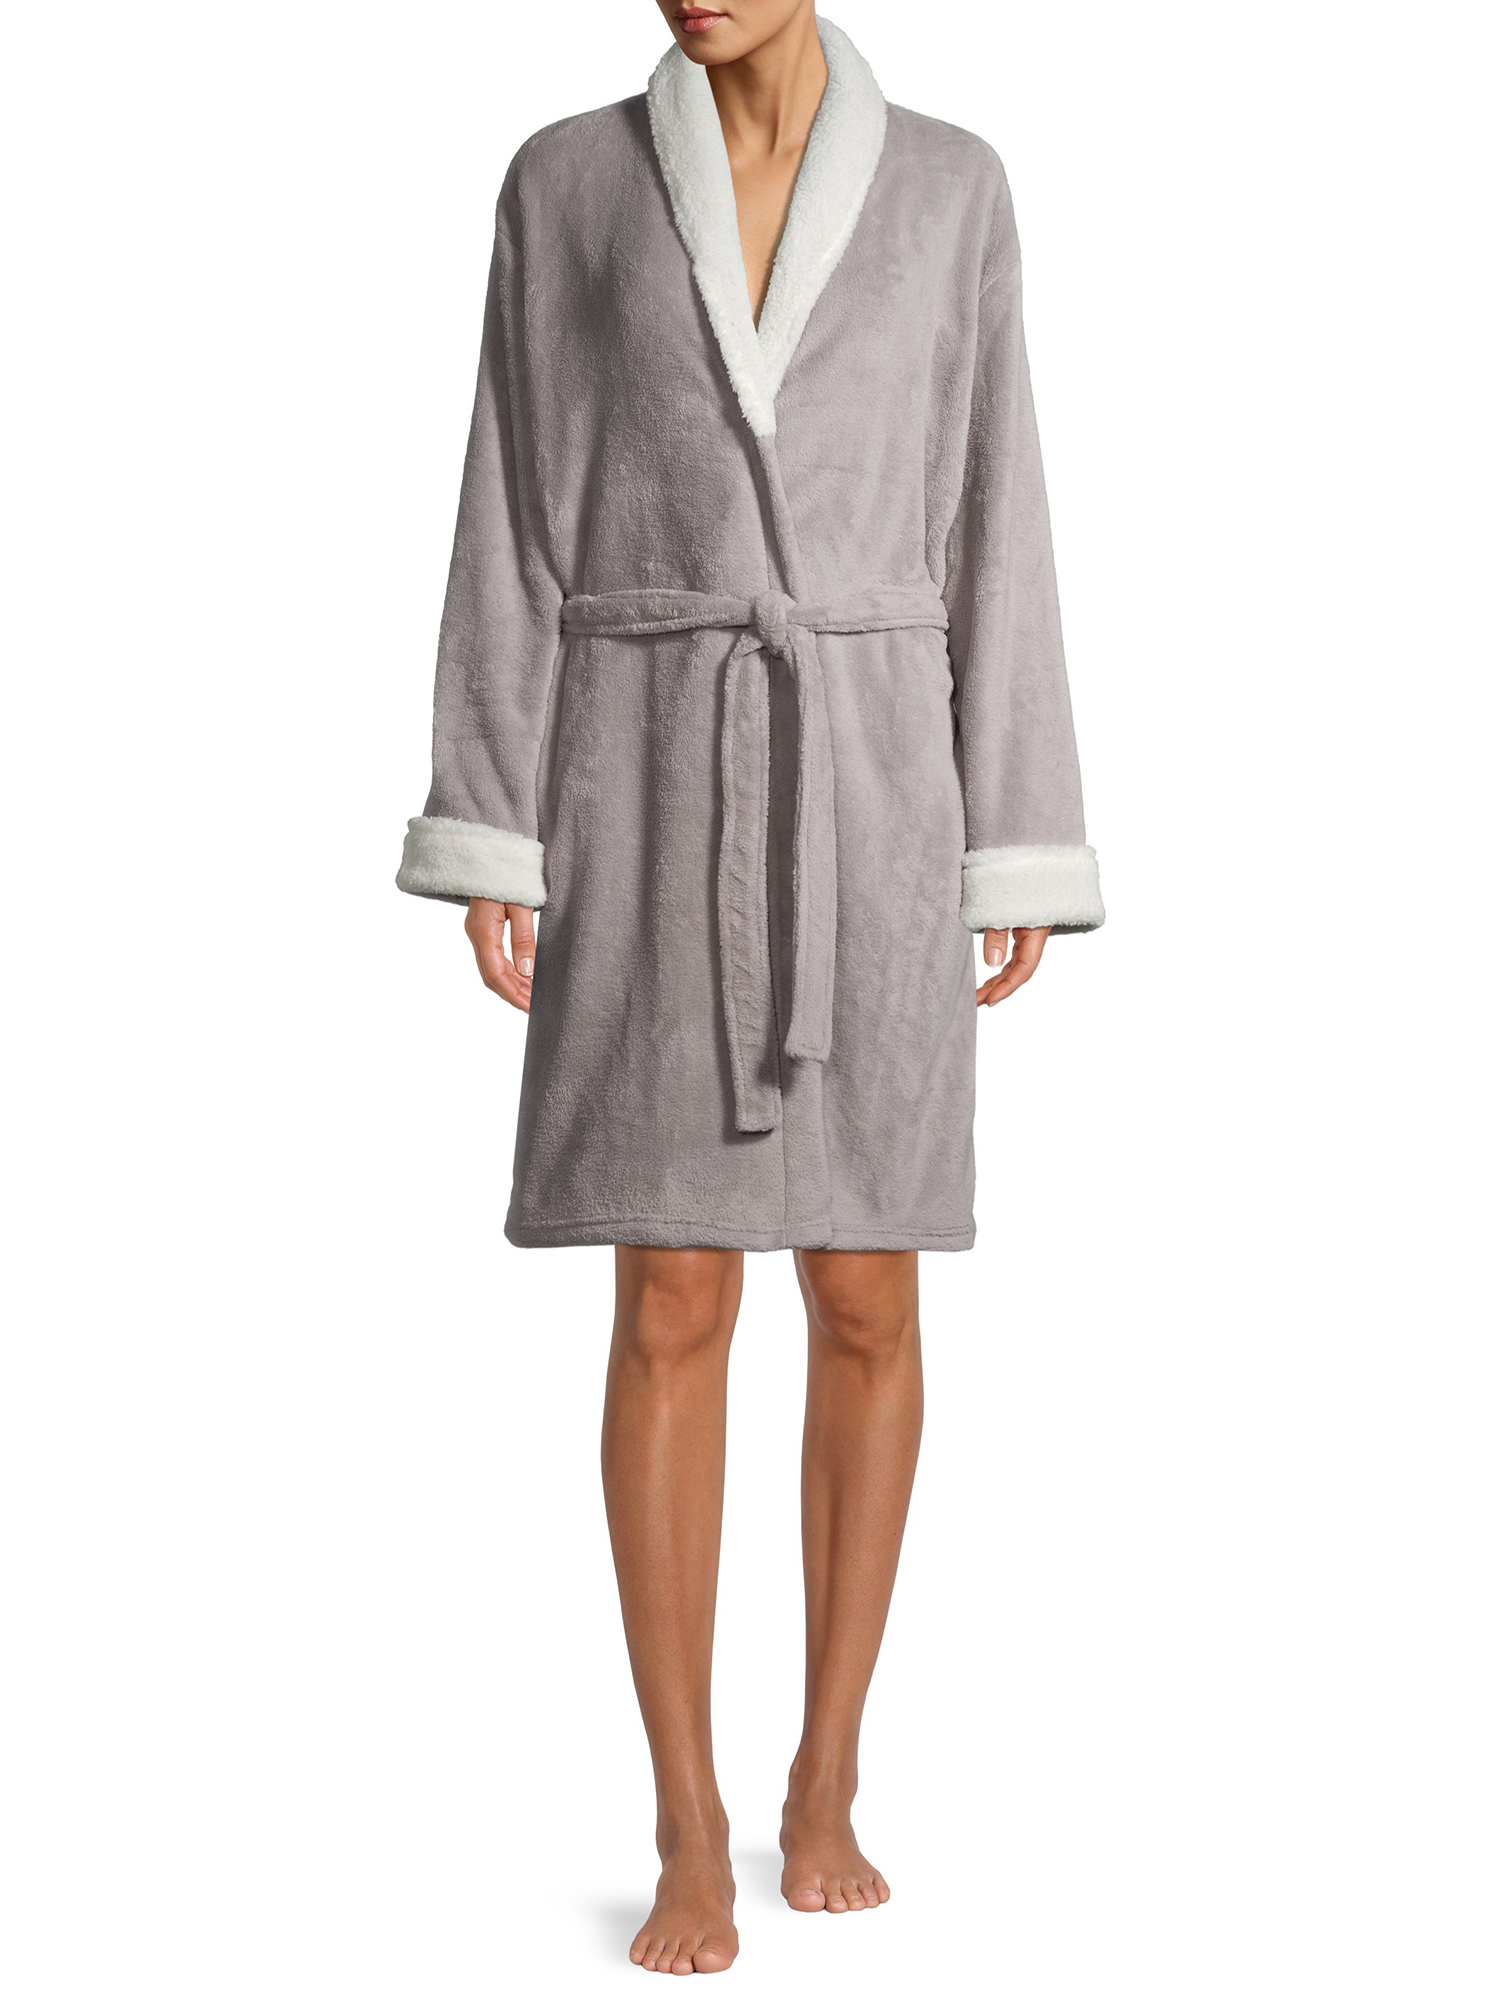 Blue Star Clothing Women's 3/4 Length Plush Robe with Sherpa Trim Collar & Cuffs - image 2 of 6